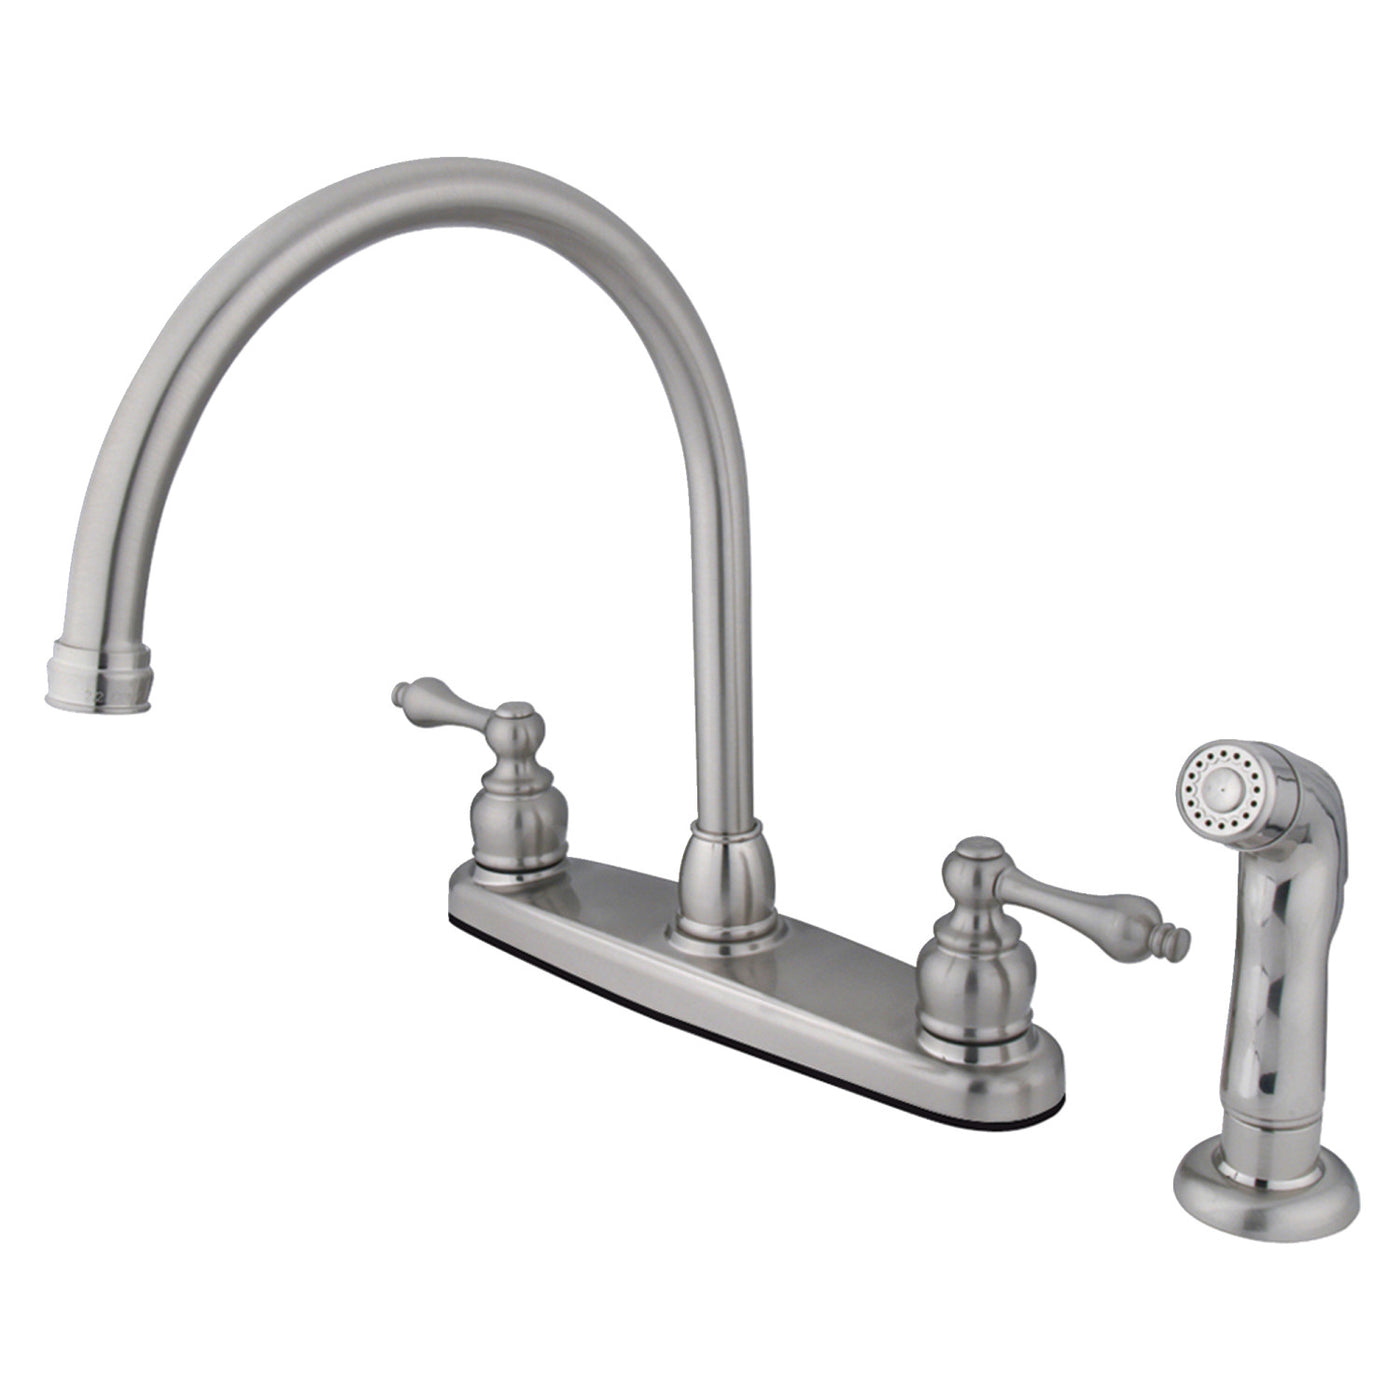 Elements of Design EB728ALSP 8-Inch Centerset Kitchen Faucet with Sprayer, Brushed Nickel